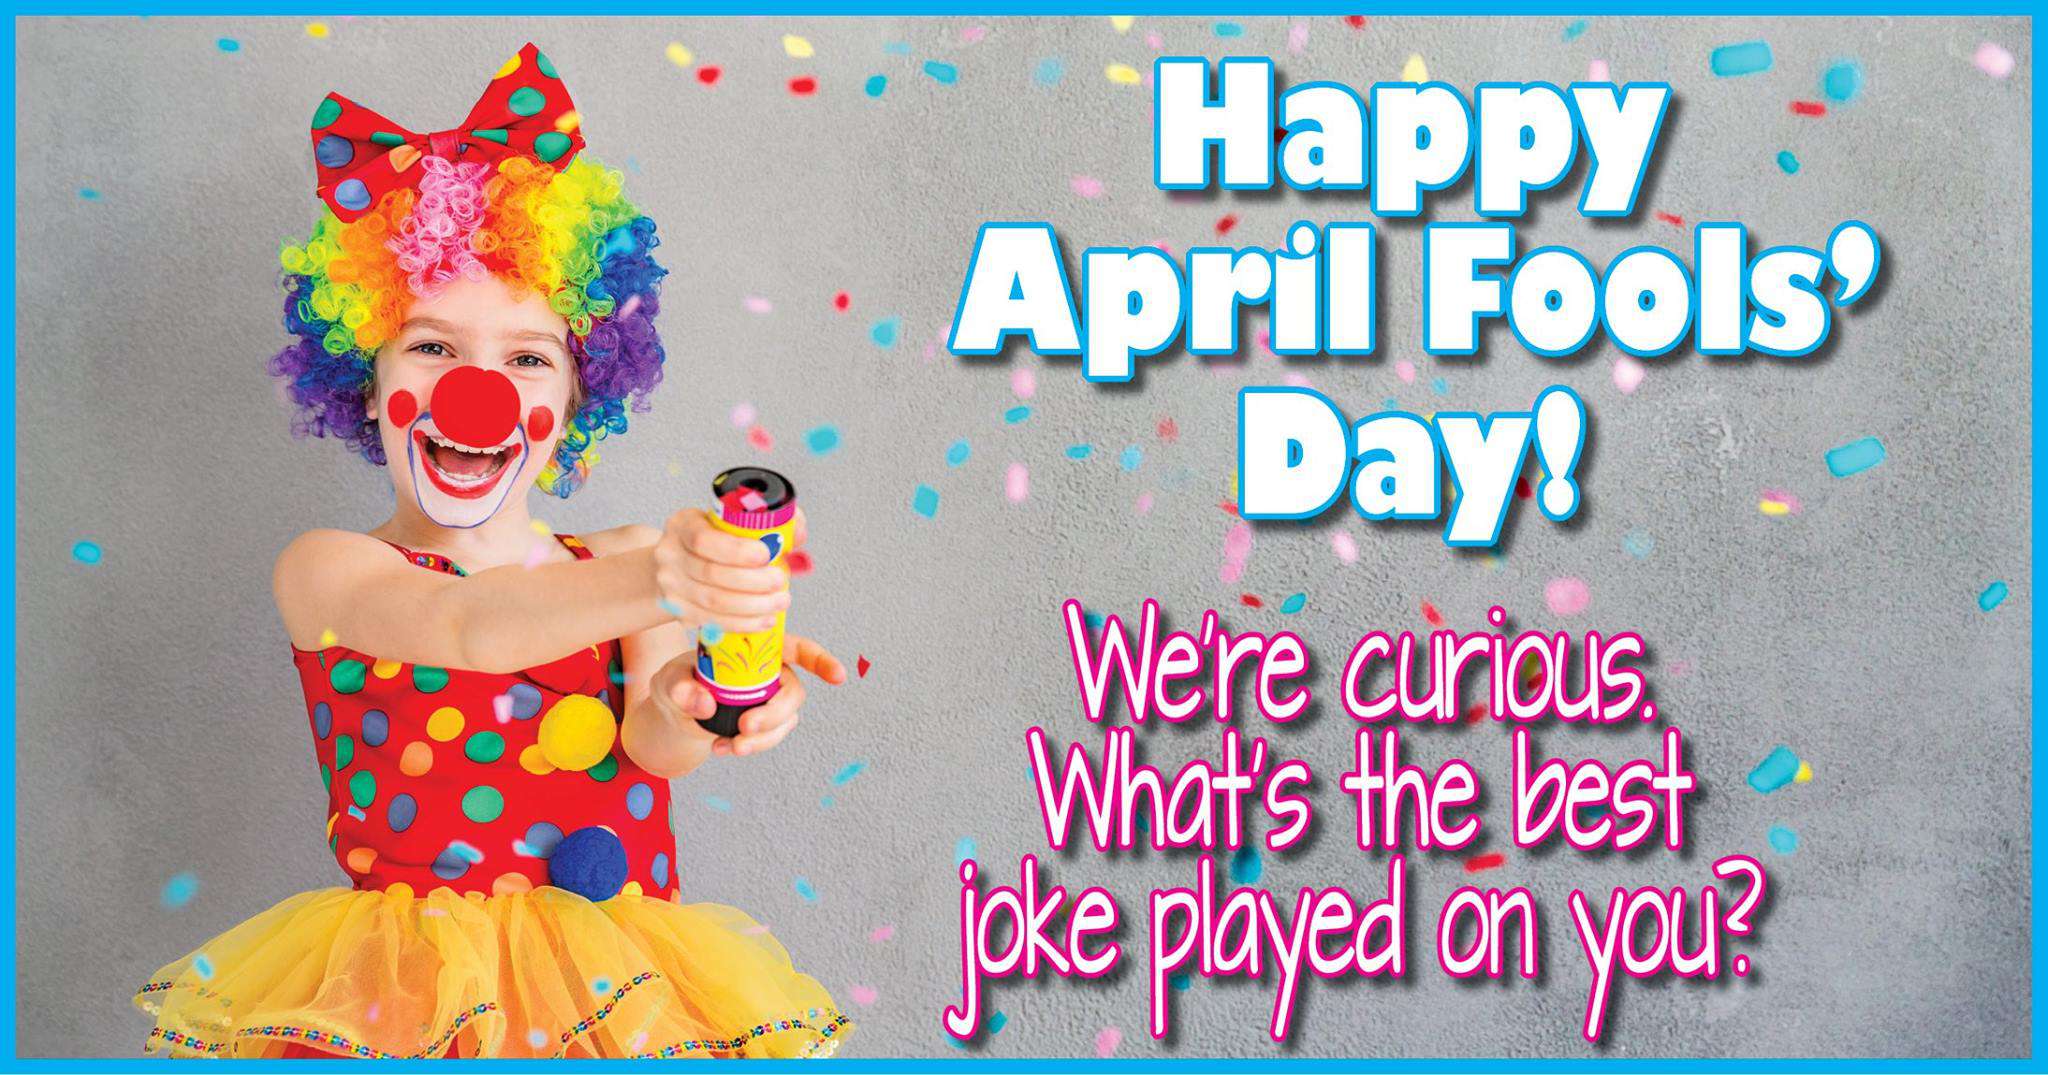 April Fools' Day Wishes For Facebook